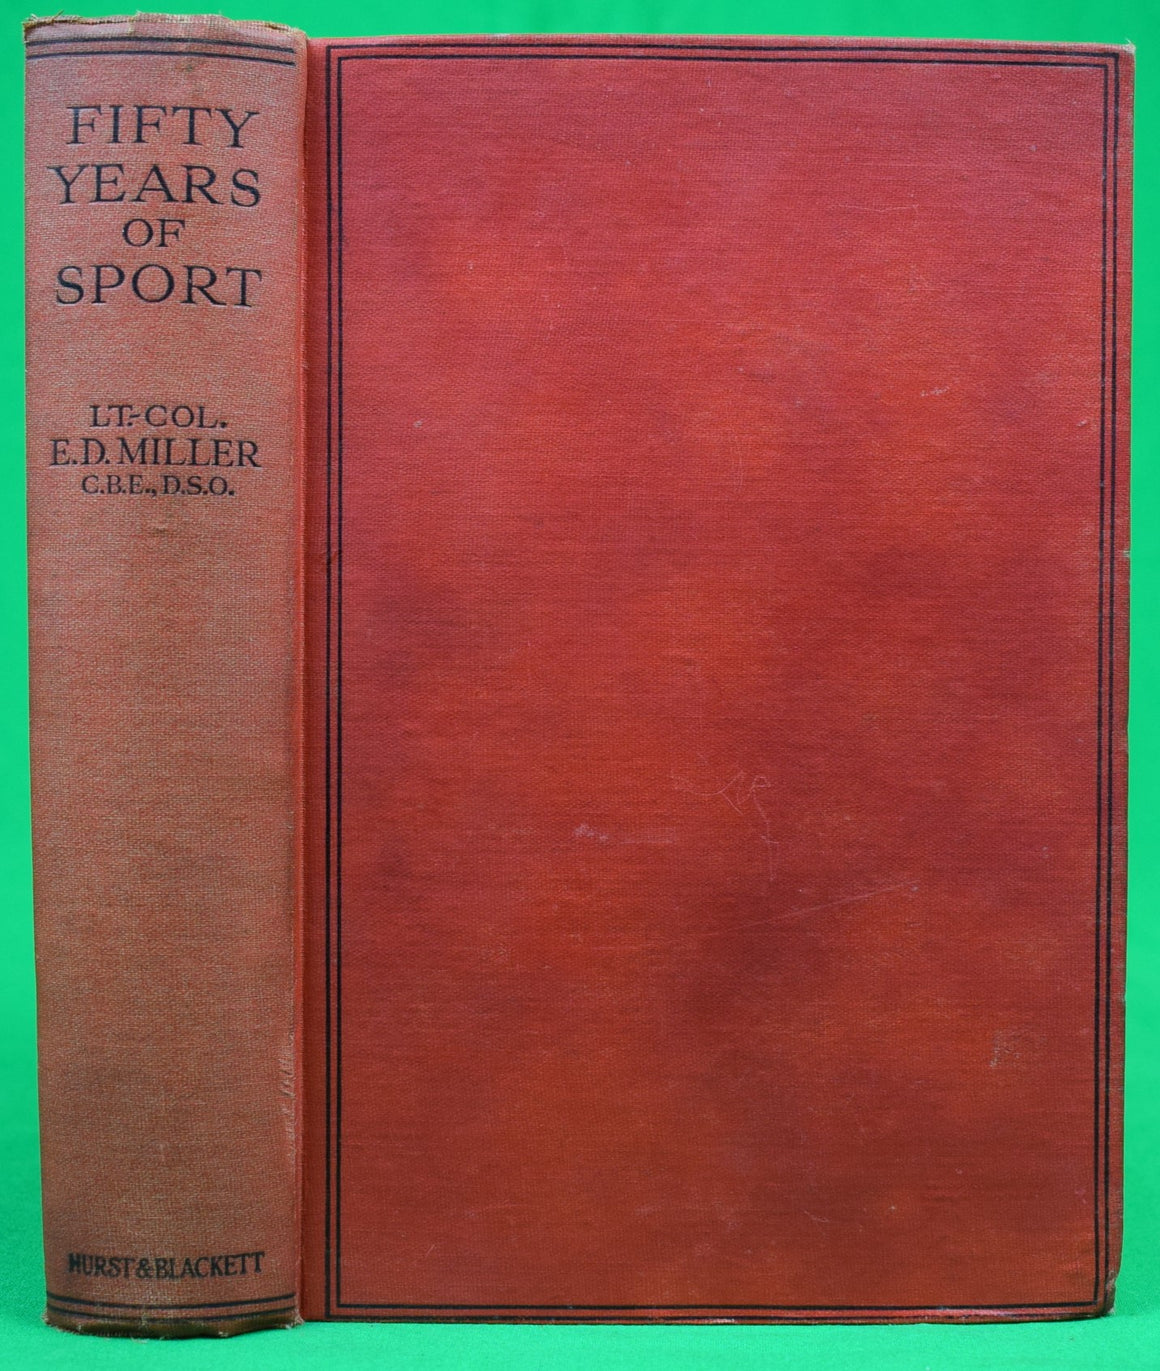 "Fifty Years Of Sport" MILLER, Lieutenant-Colonel E.D. (SOLD)